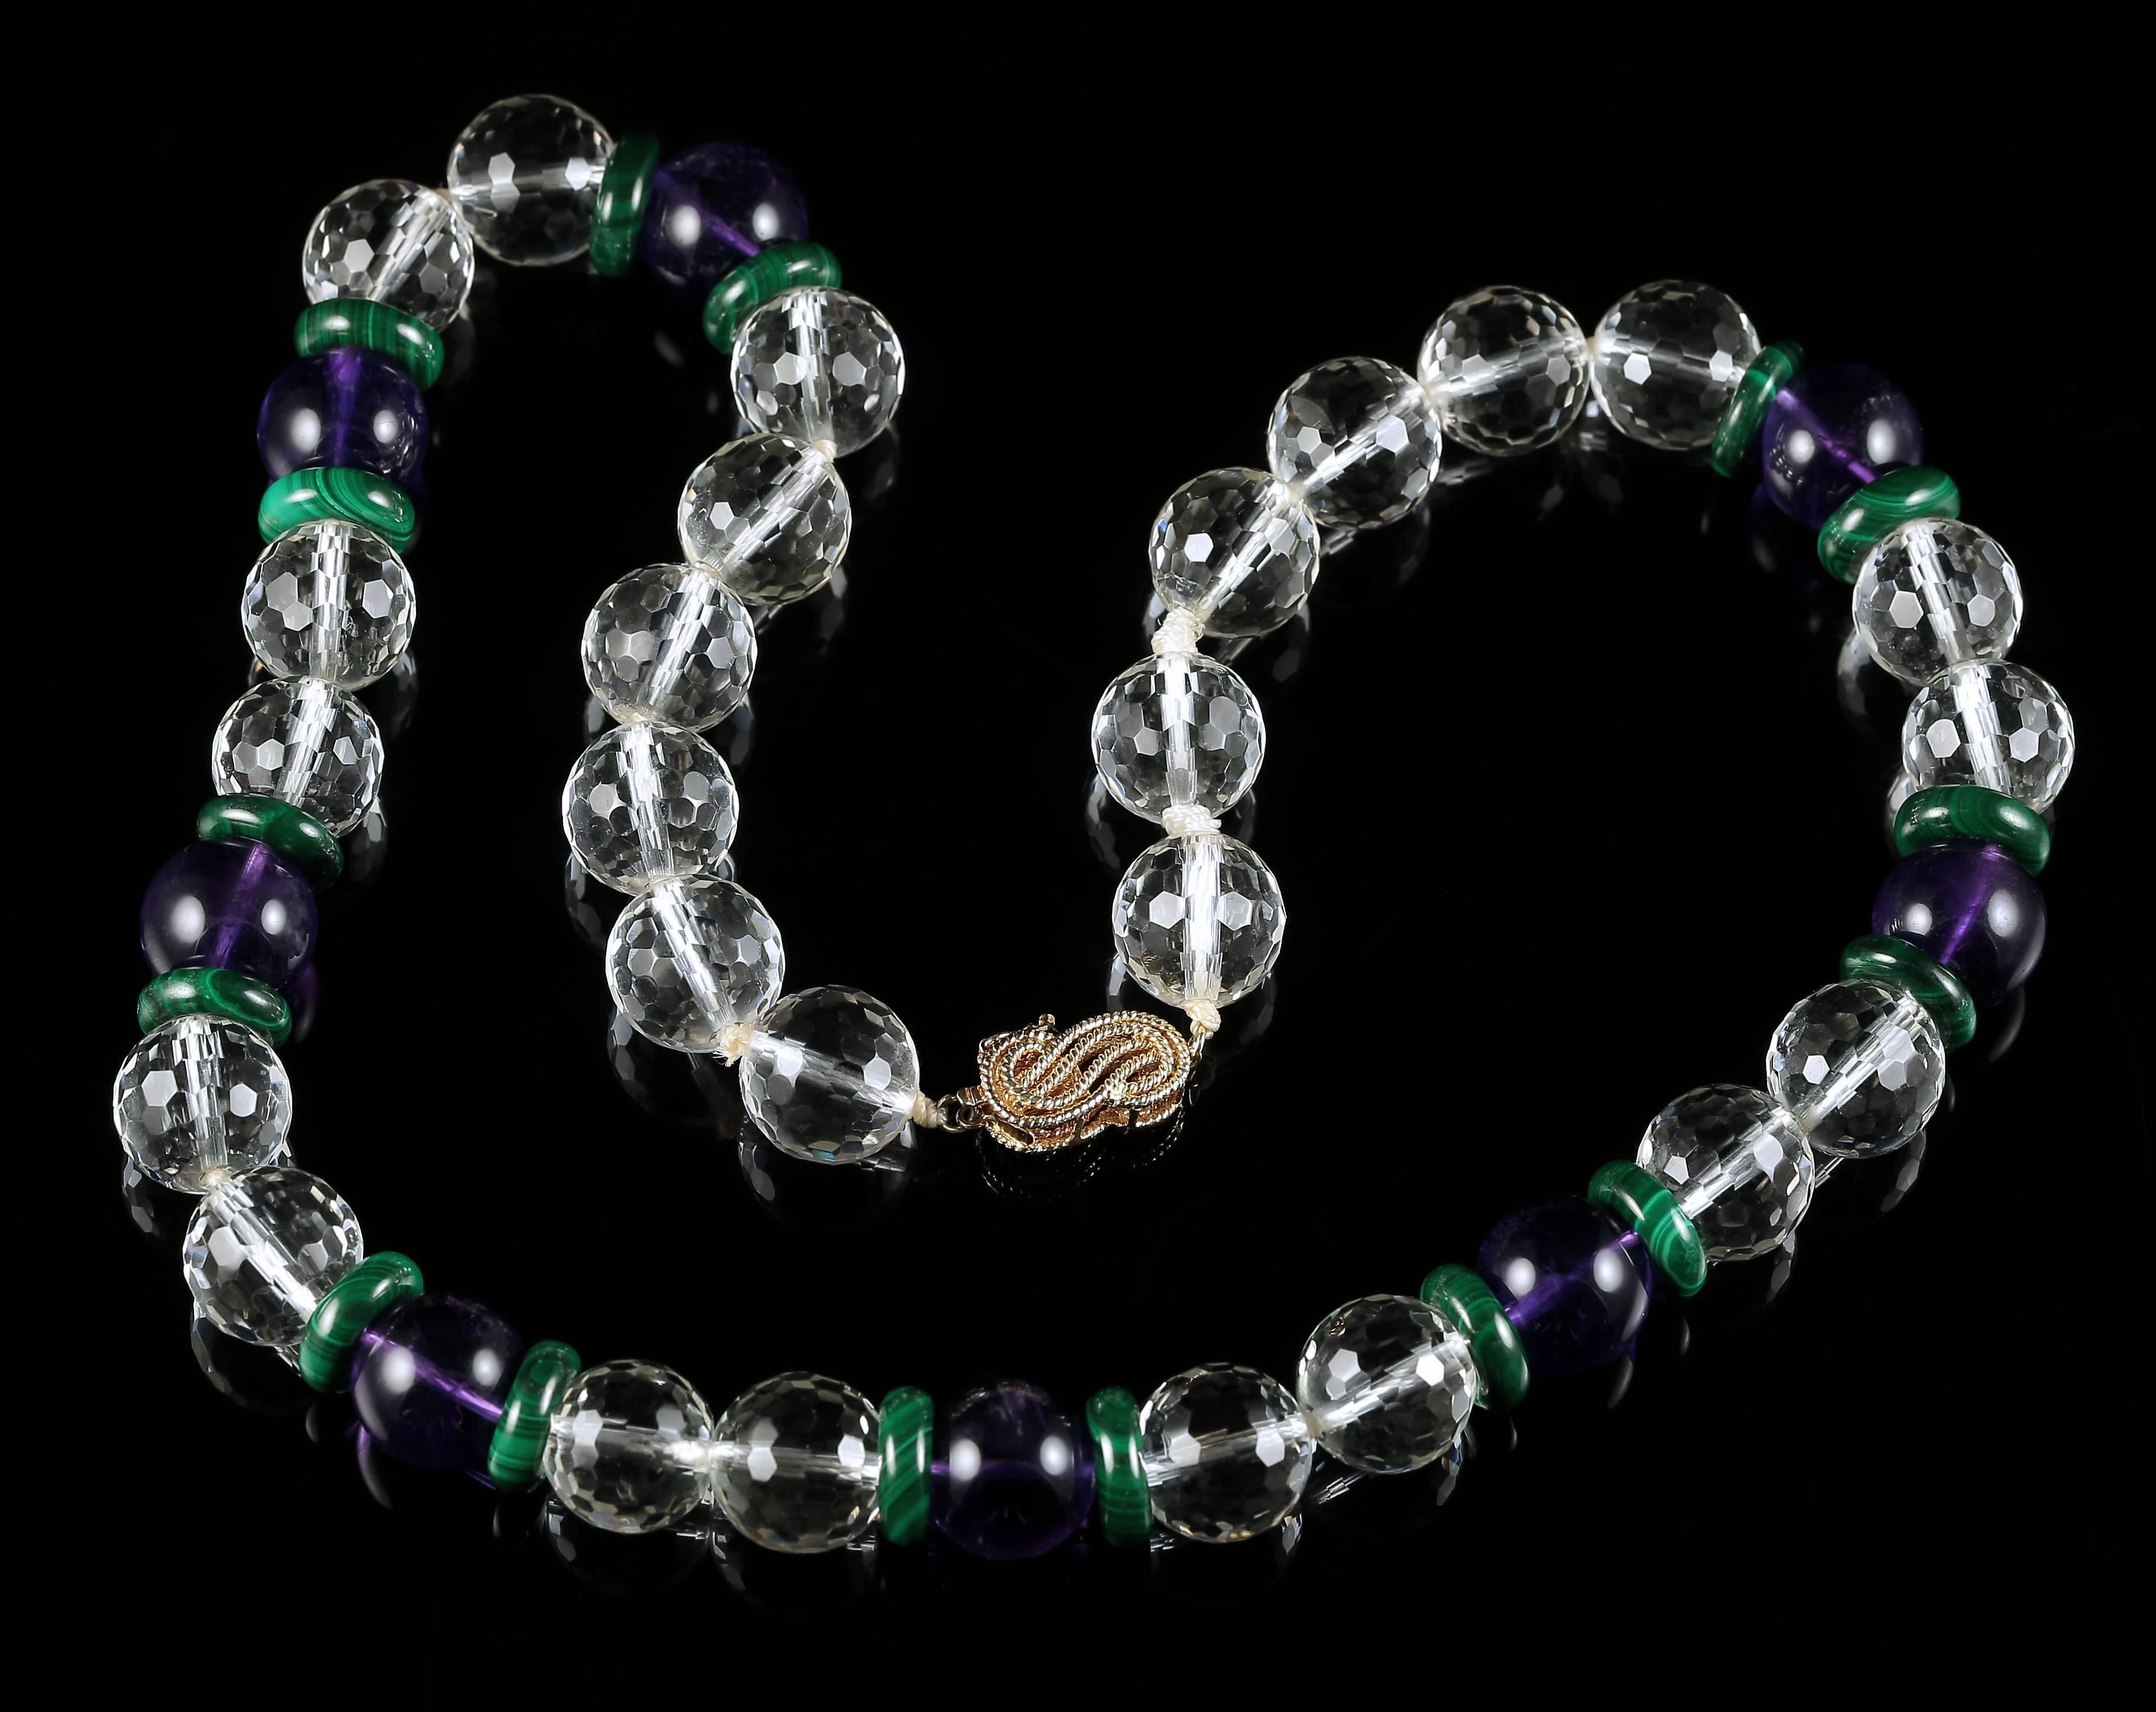 This fabulous Antique Suffragette necklace is set with genuine gemstones with a 14ct gold clasp.

The white stones are Rock Crystal the purple is natural Amethyst and the malachite is natural too. 

Leading to a newer 14ct gold clasp, the necklace